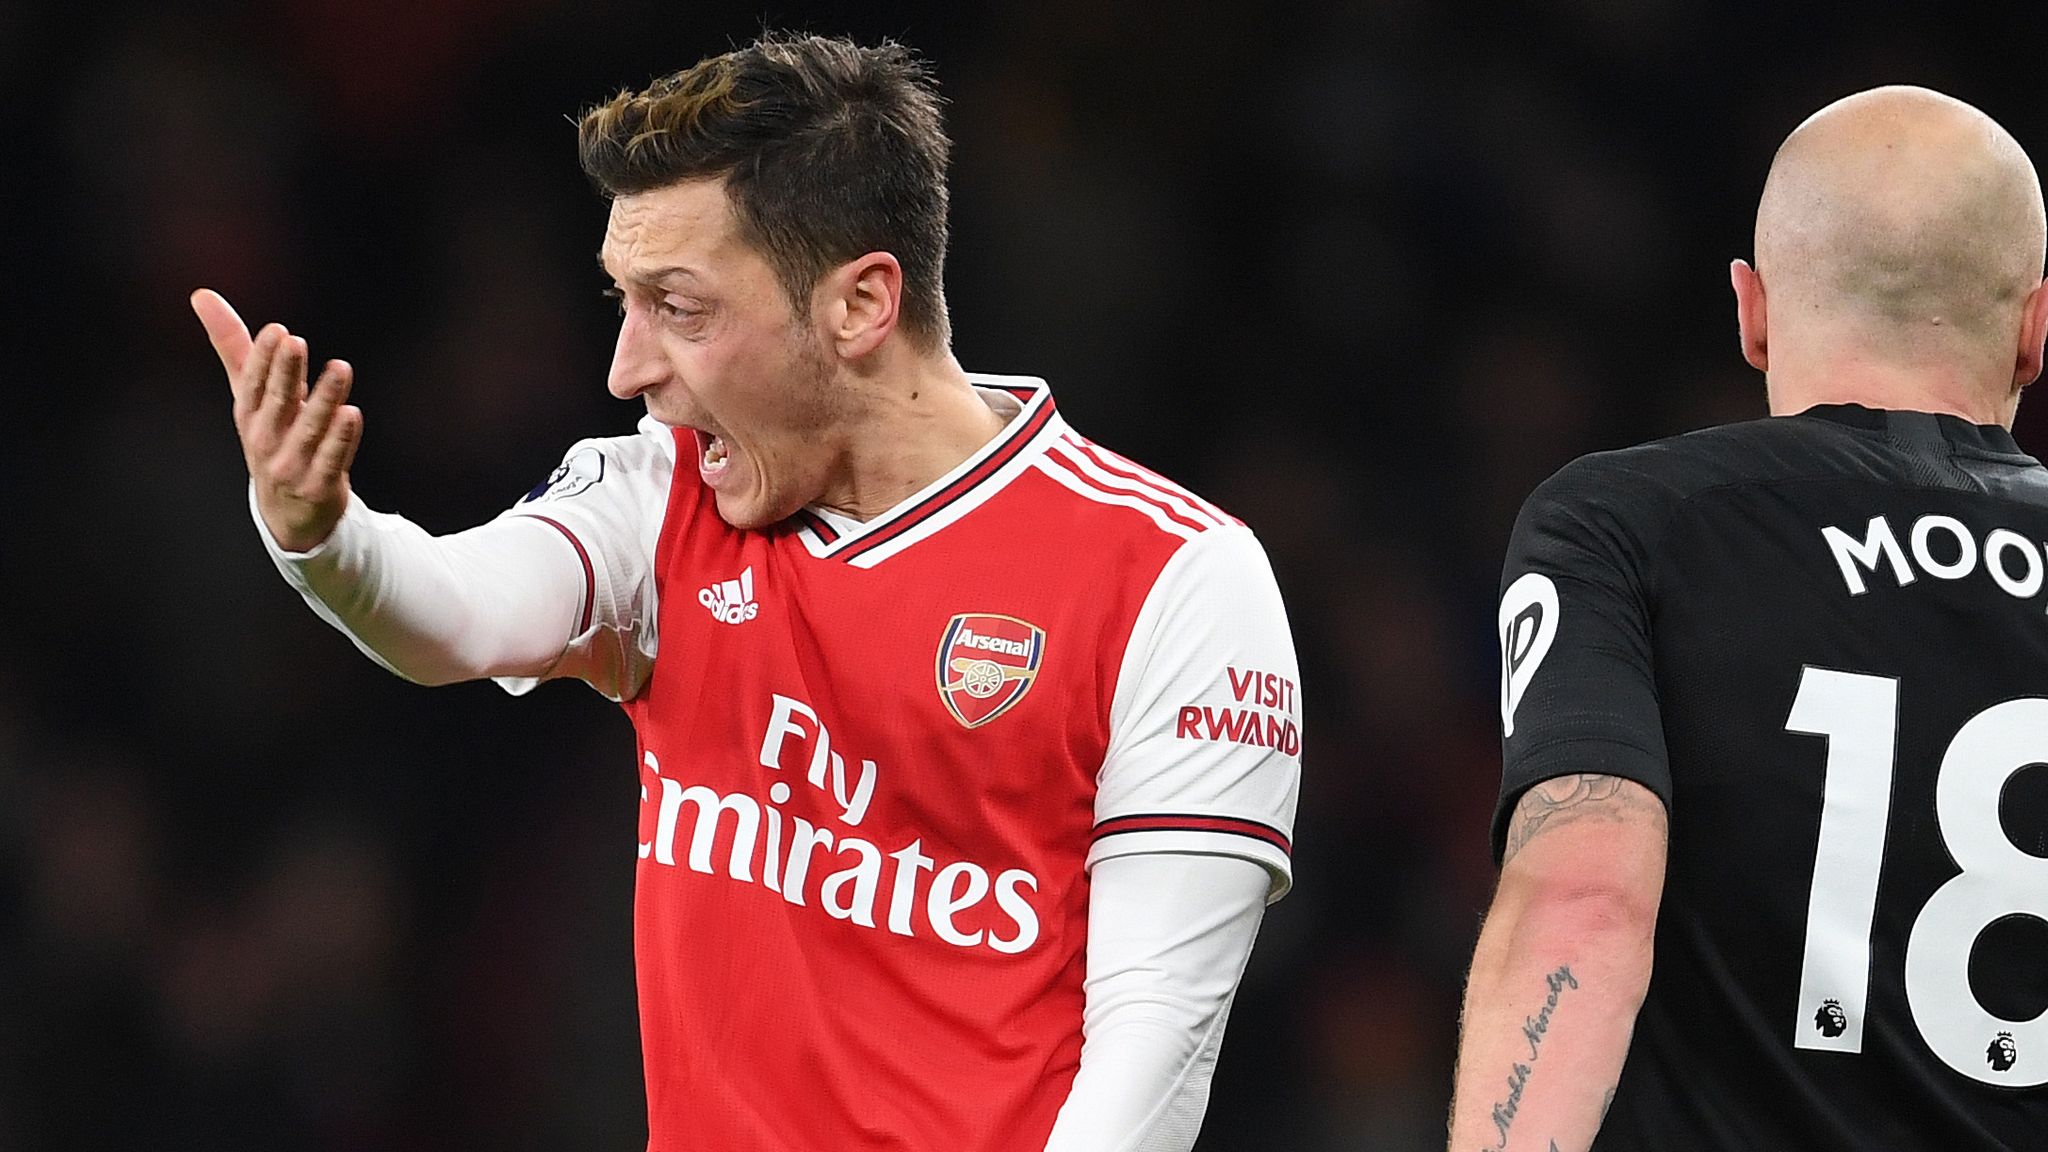 Arsenal moves five points clear in Premier League title race with last-gasp  goal but goalkeeper debacle rumbles on